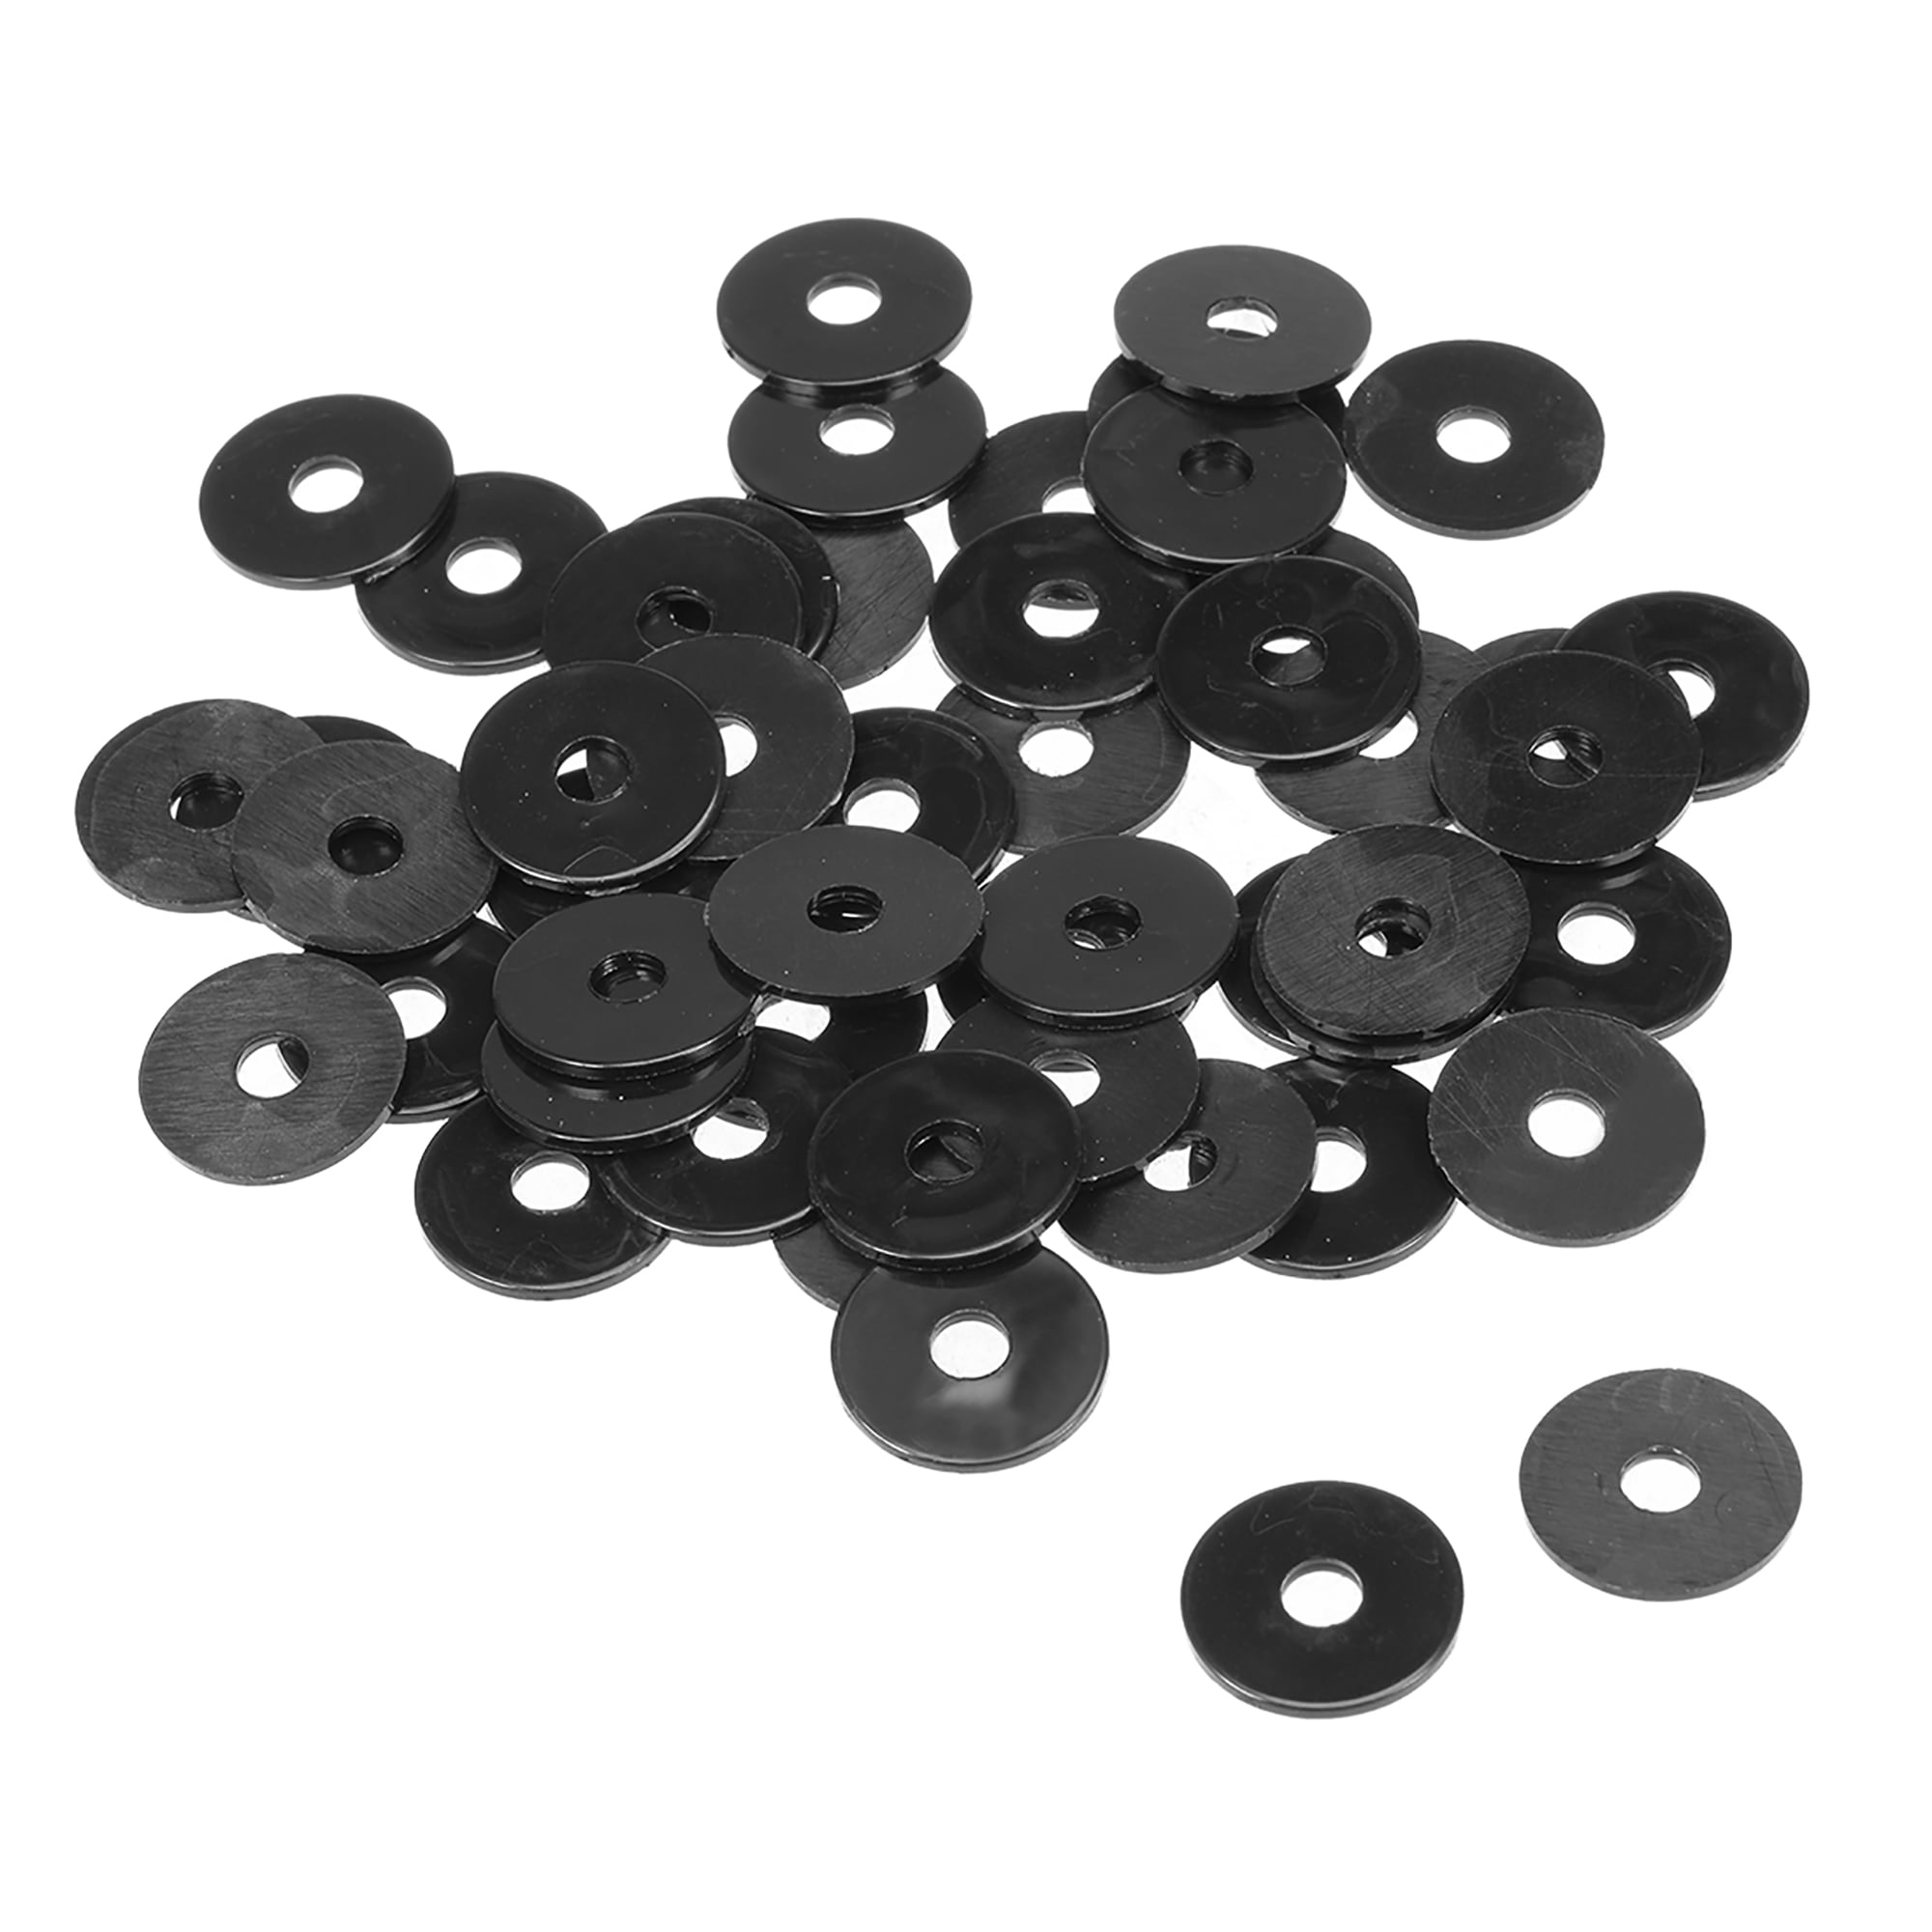 sleeve PICK LENGTH M10 Clearance Mild Steel 20mm O/D washer spacer 